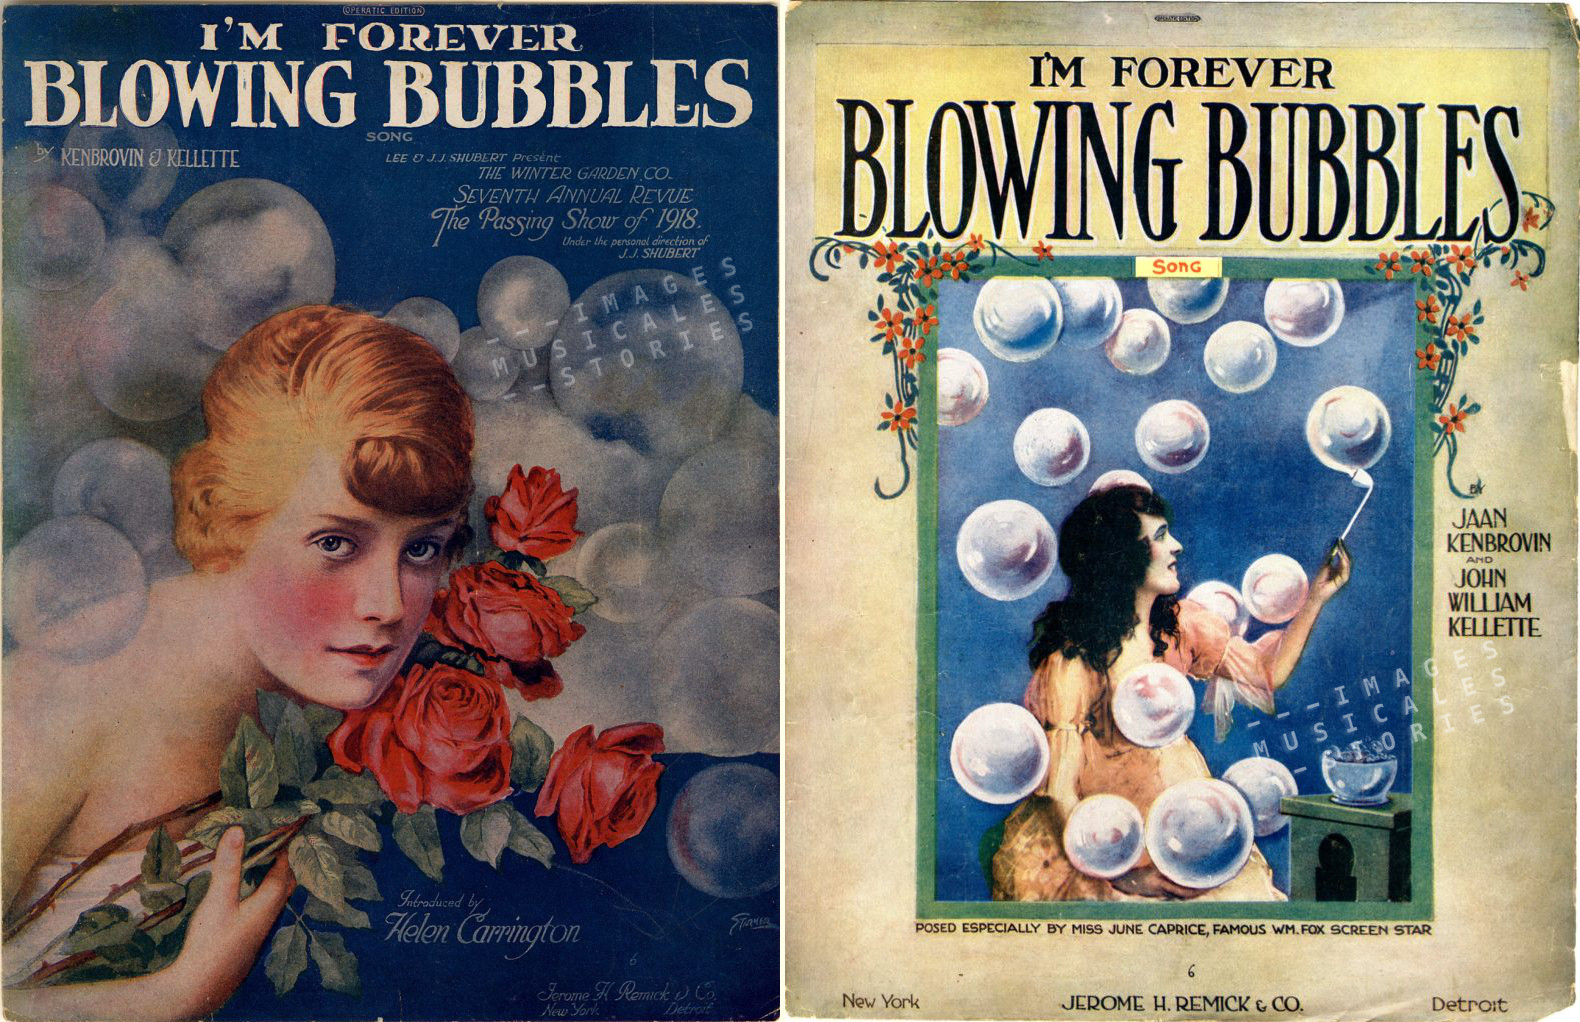 Sheet music cover for ''I'm Forever Blowing Bubbles' by John William Kellette & Jaan Kenbrovin